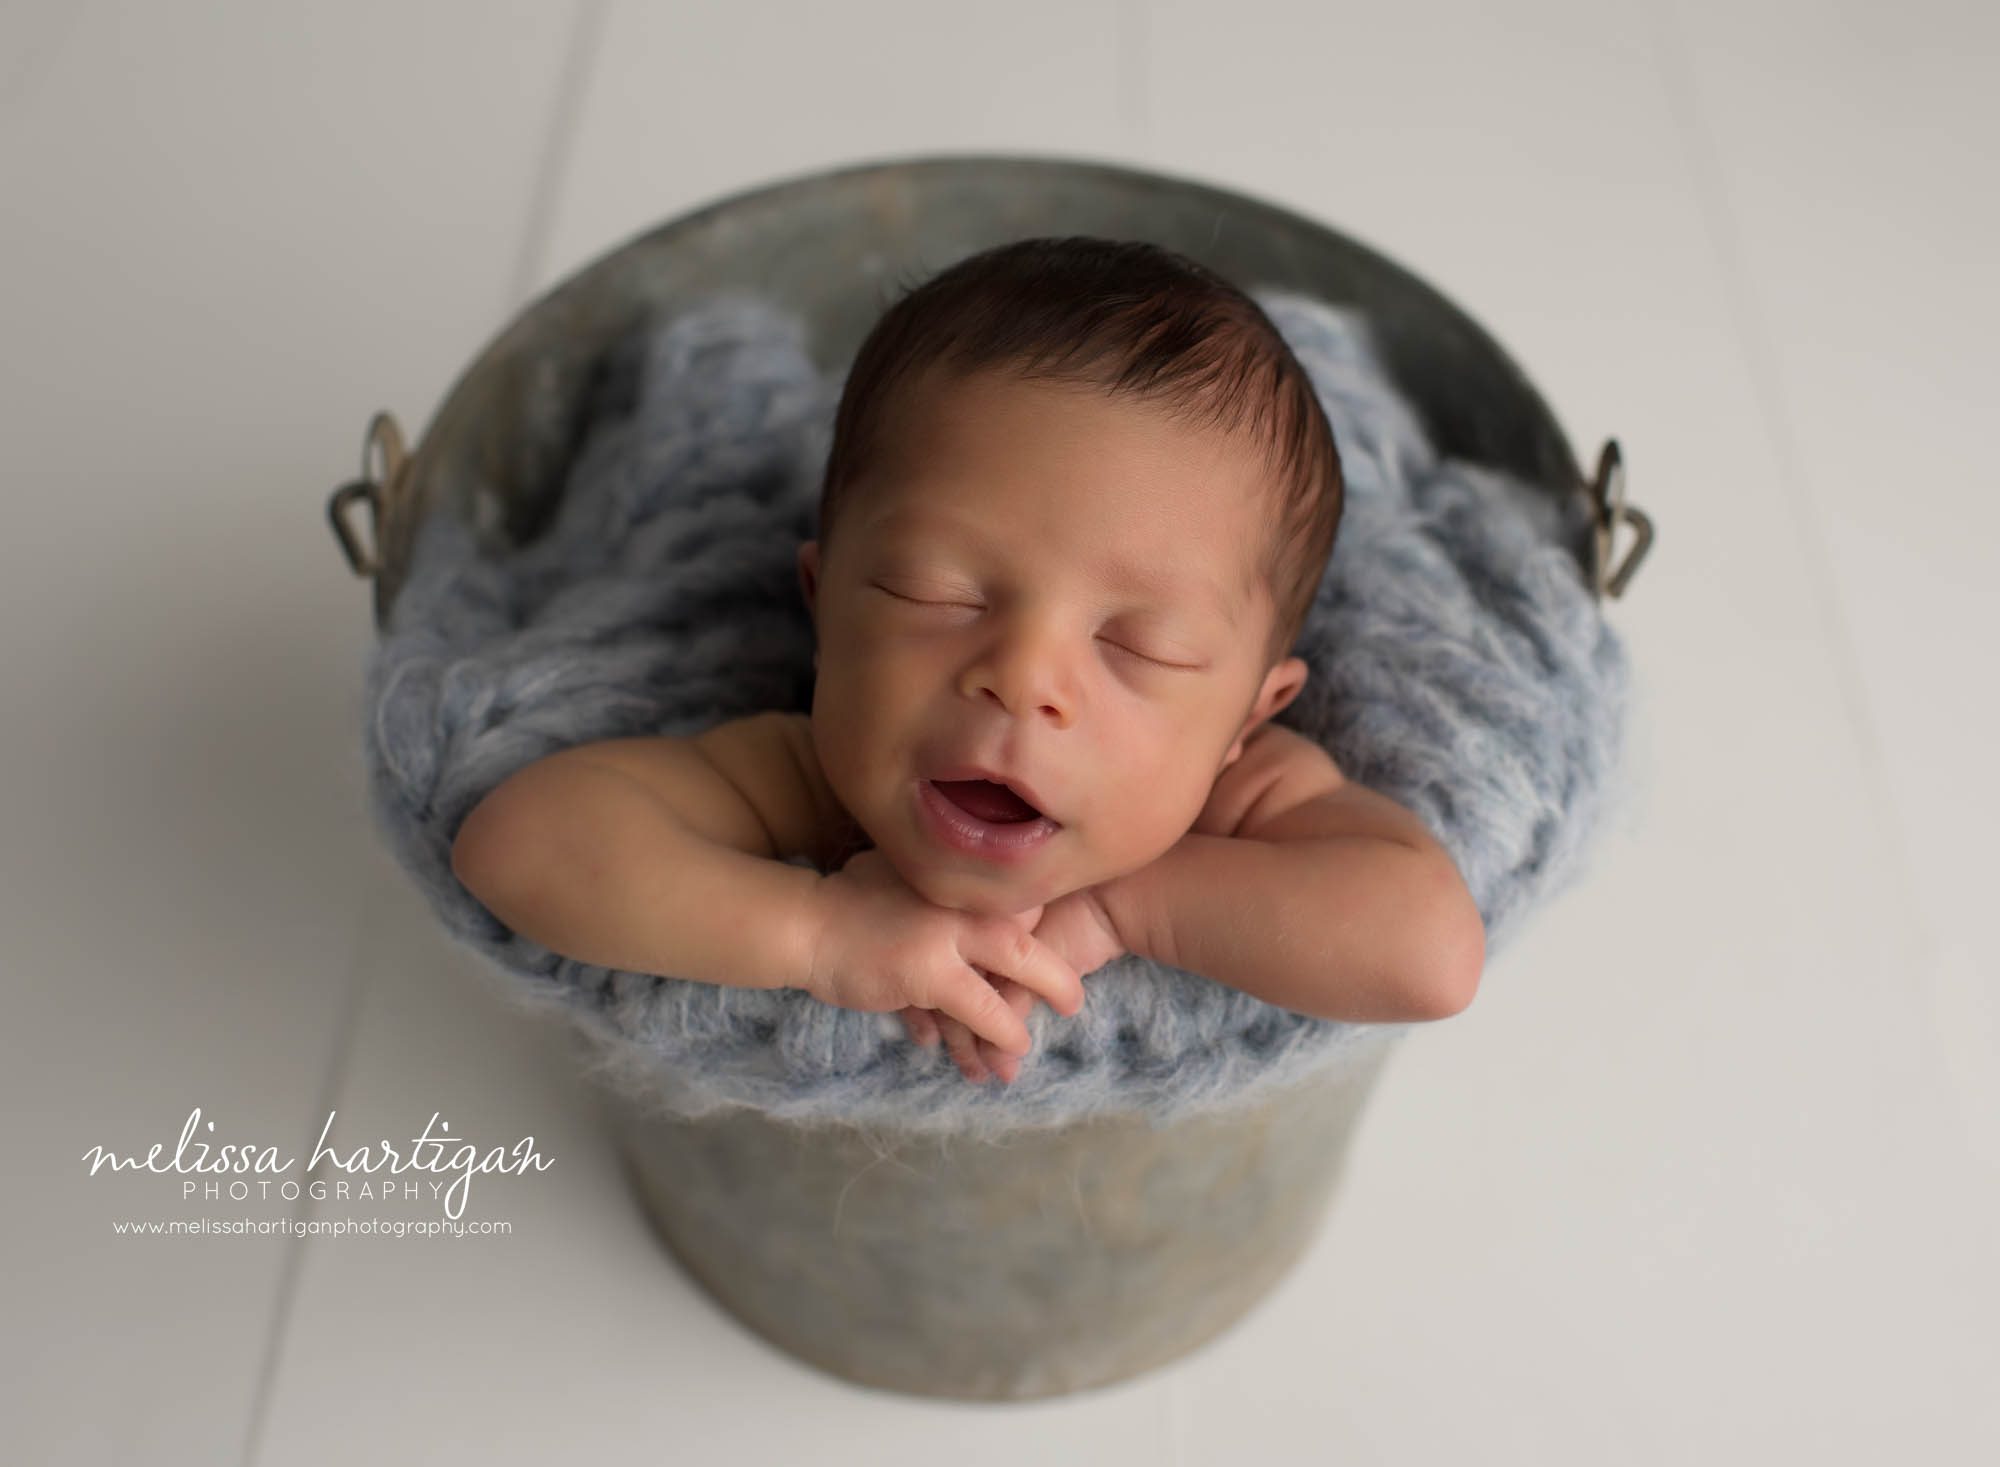 Newborn baby boy posed in metal bucket with blue knitted layer